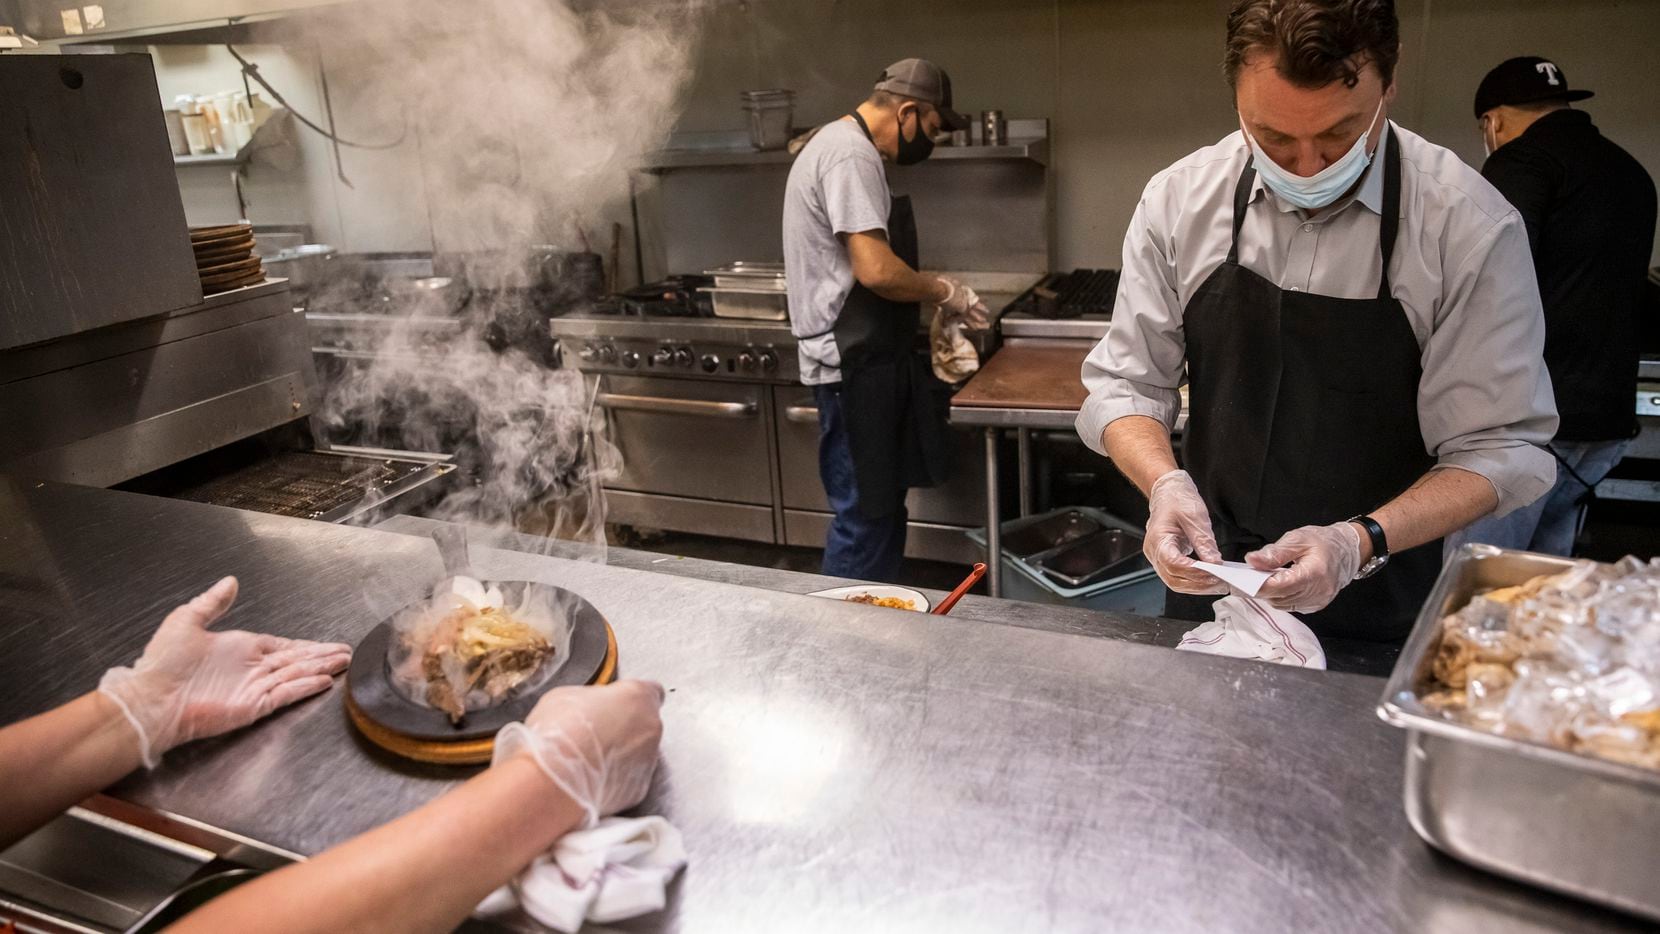 General Manager Shane Ross (right) jumps behind the line to help plate dinner dishes for customers in the kitchen of Los Vaqueros Restaurant in in Fort Worth, Texas, on Saturday, March 13, 2021.